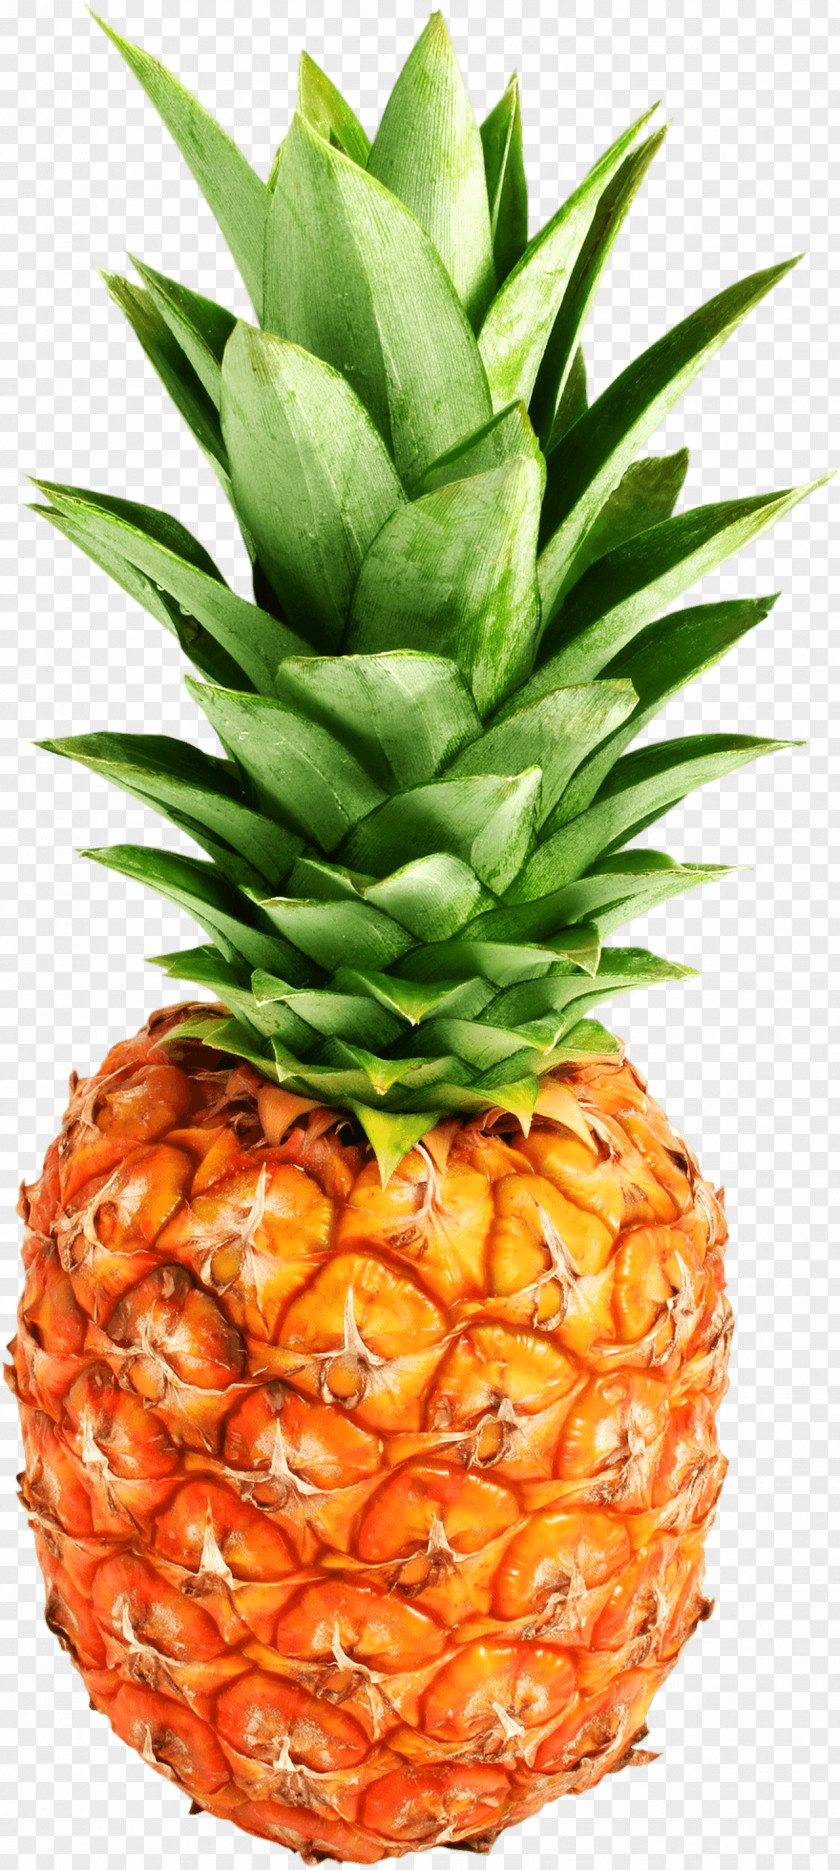 Pineapple Image Download Juice IPhone 7 PNG